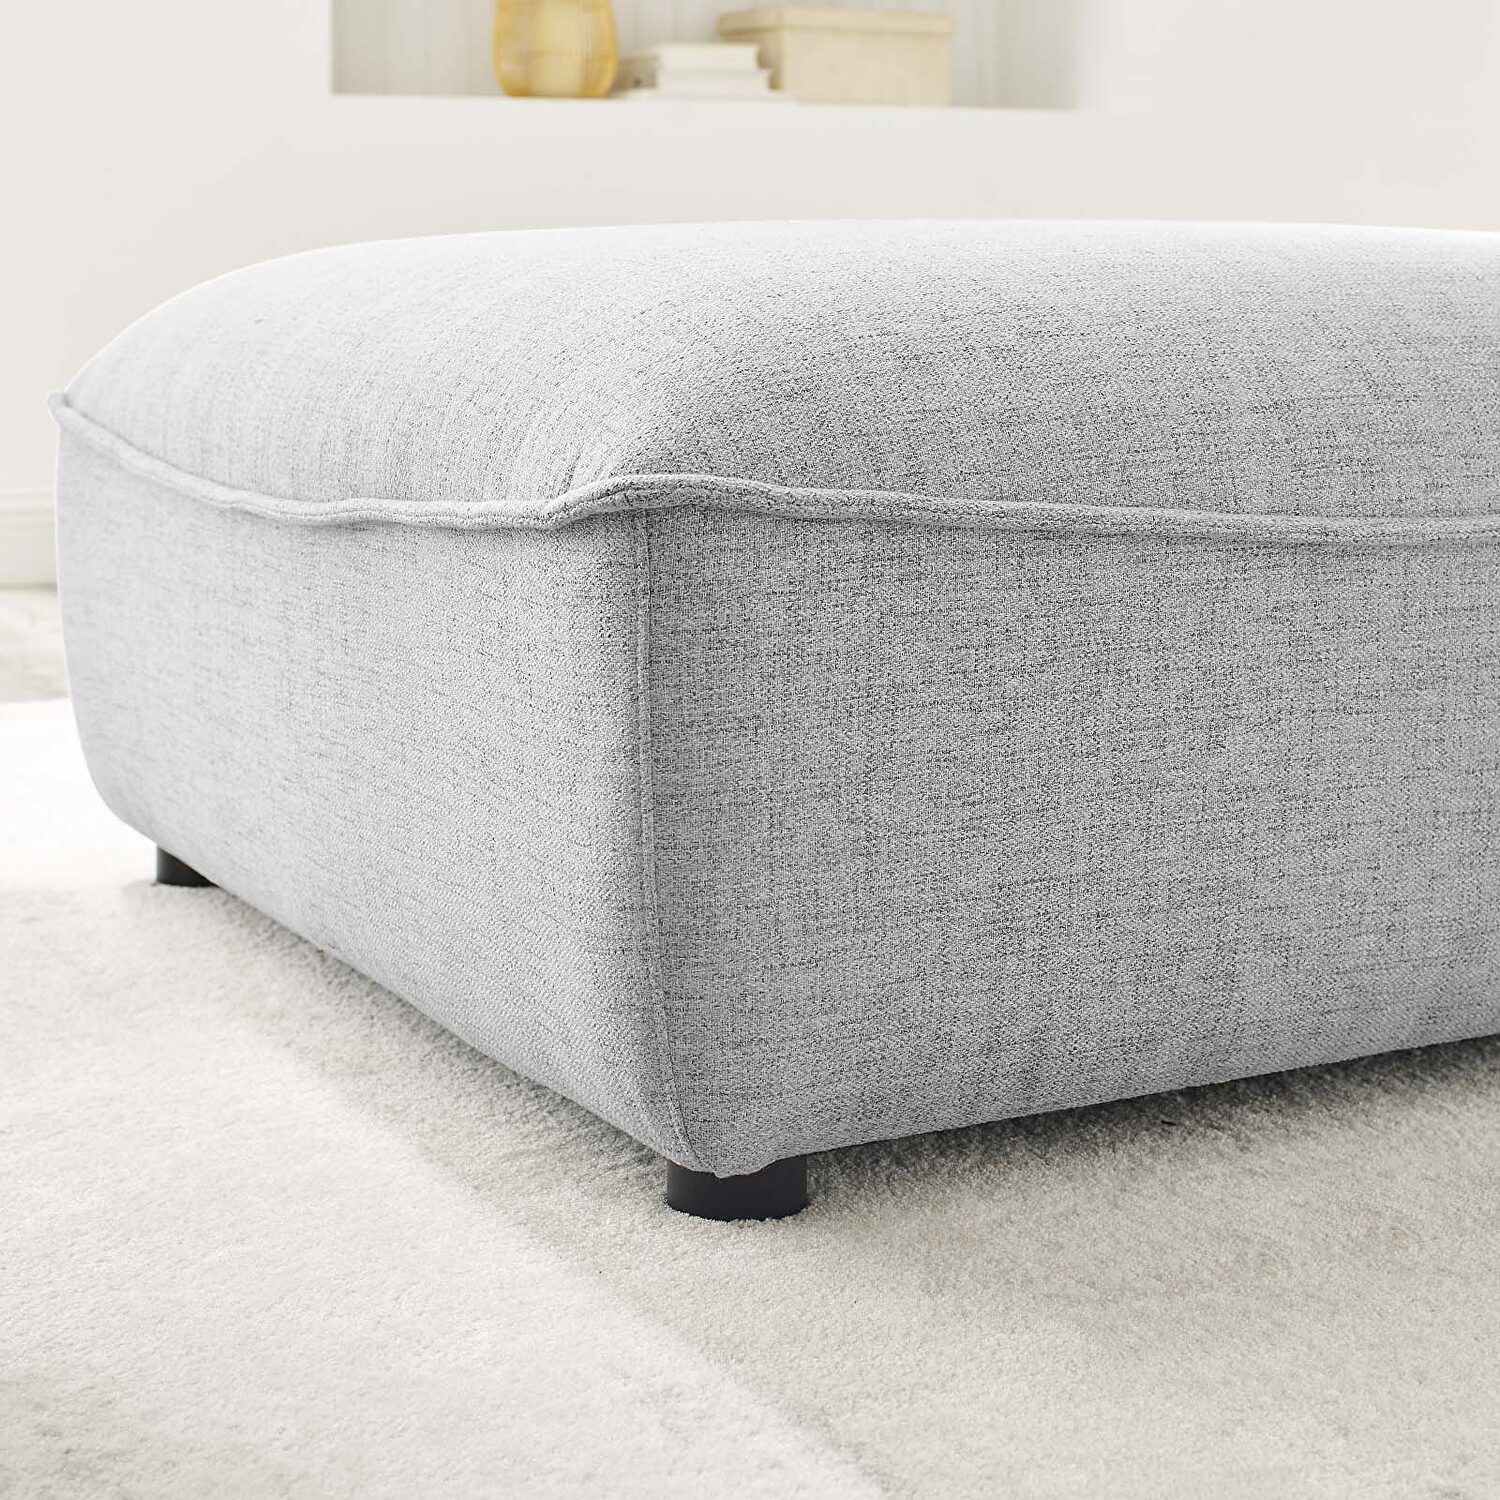 Modway Comprise Light Gray Ottoman Eei 4419 Lgr | Comfyco With Upholstery Soft Silver Ottomans (View 1 of 15)